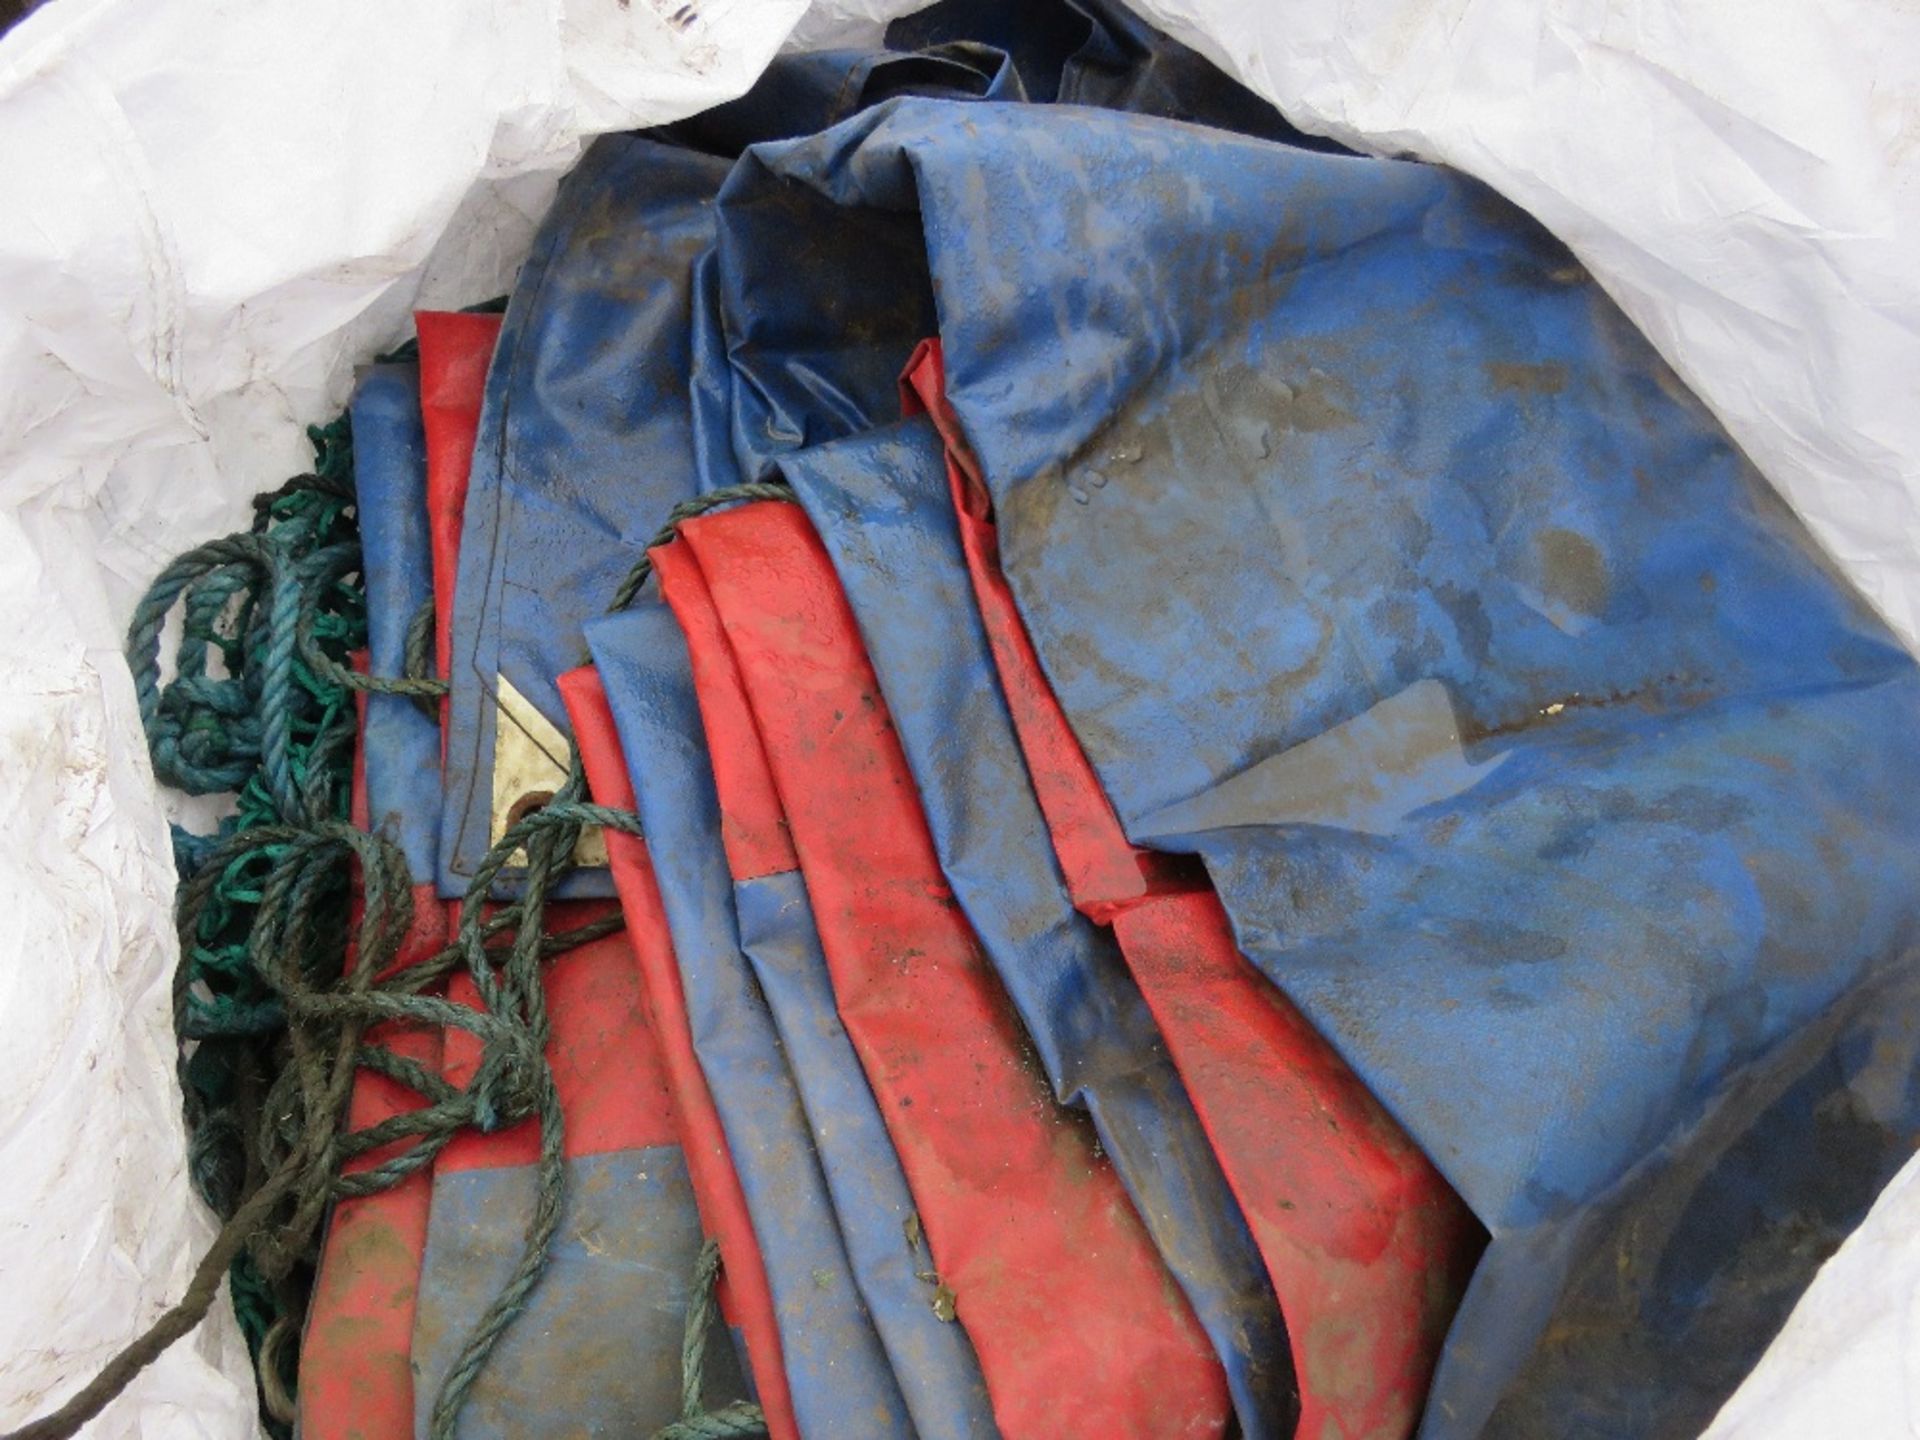 BULK BAG CONTAINING LOAD NETS AND TARPAULINS. - Image 2 of 3